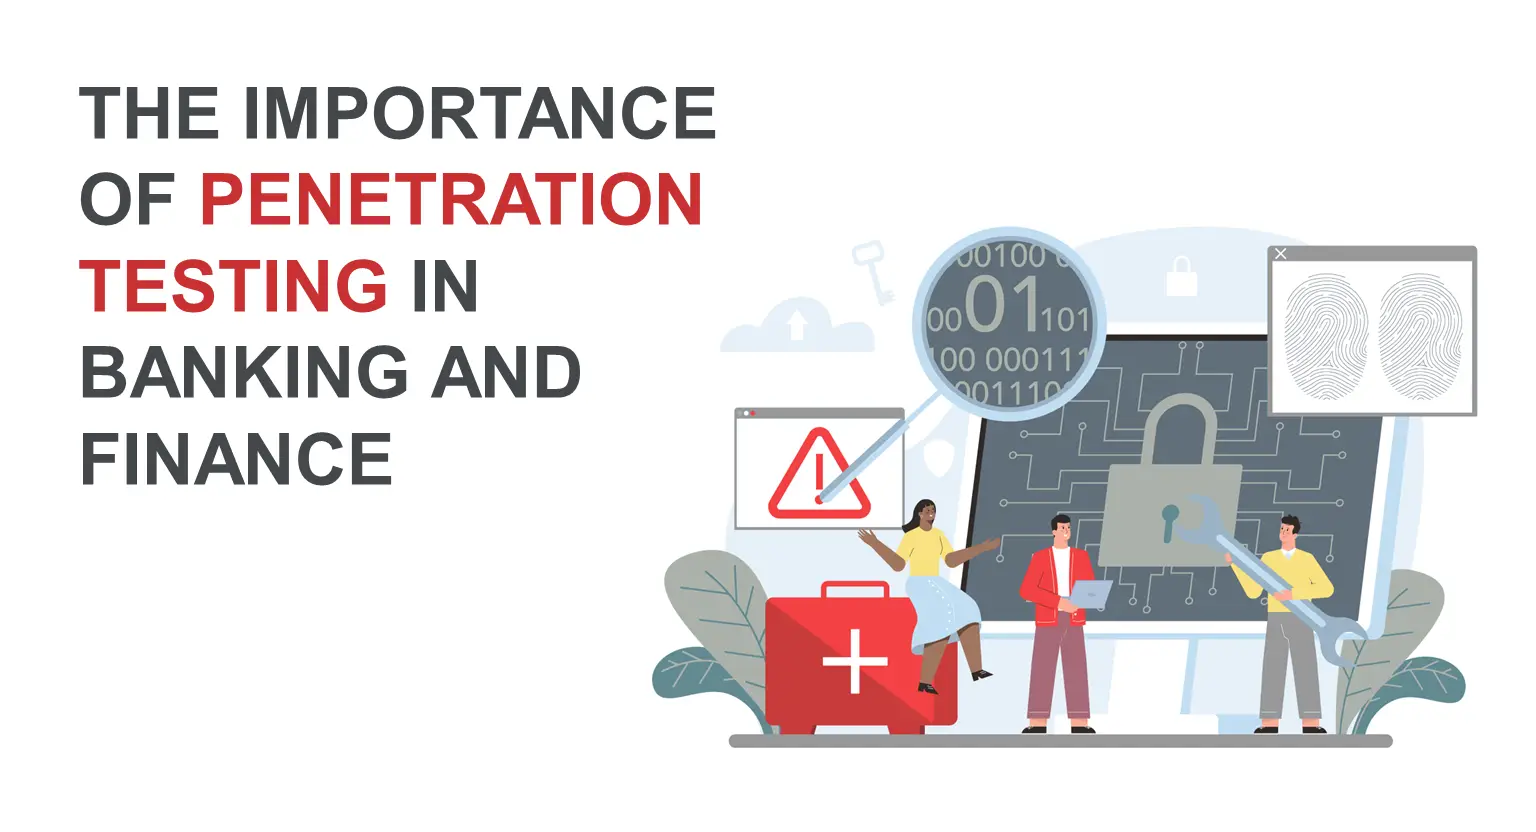 The importance of Penetration Testing in Banking and Finance